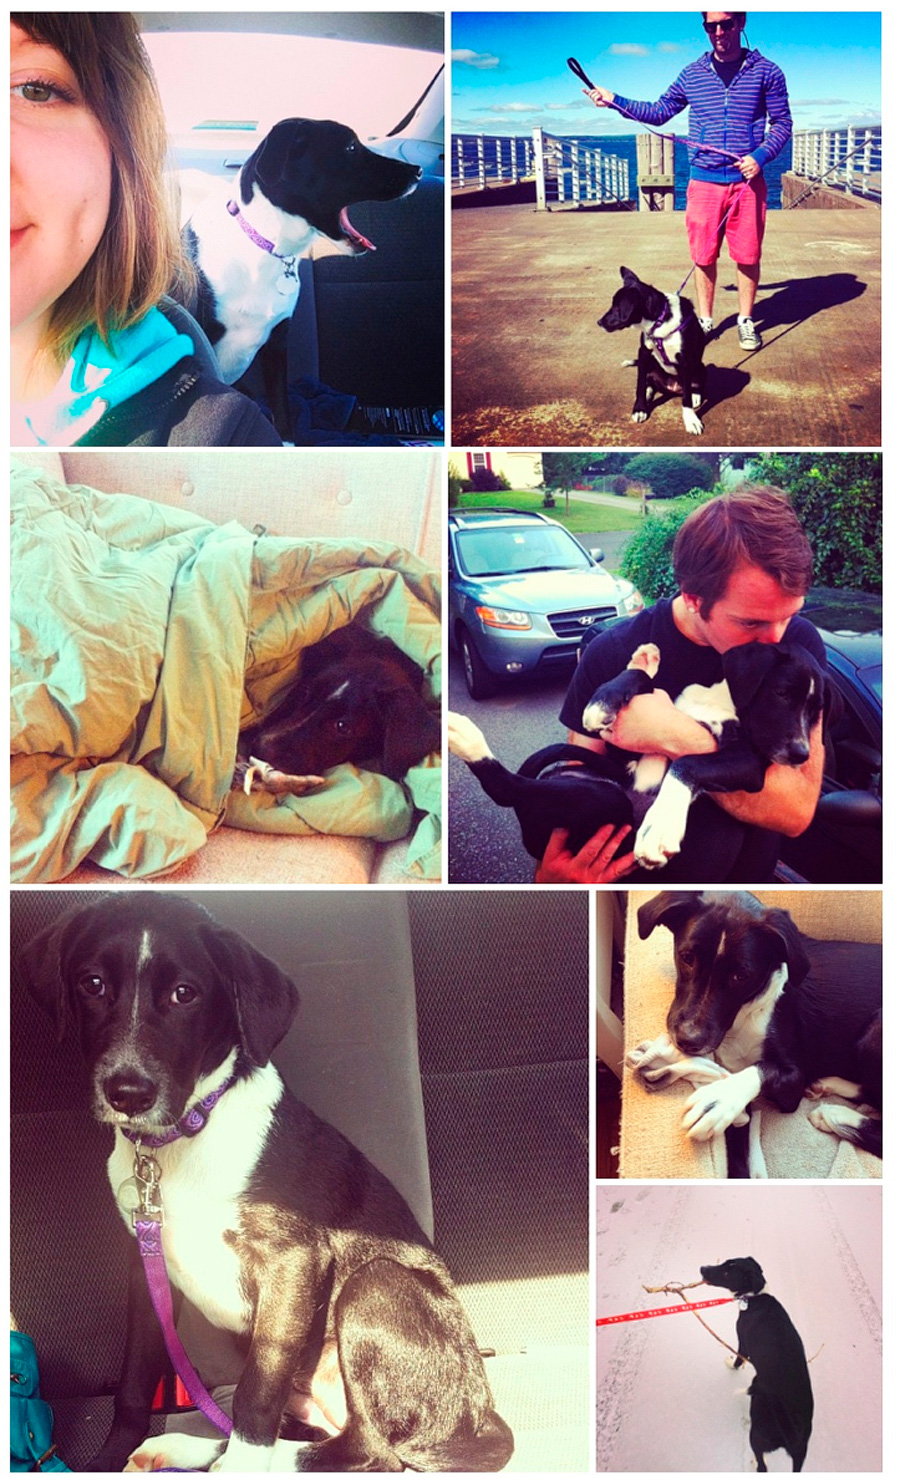 In July we adopted a rescue puppy and named her Mukow. She has been THE GREATEST!